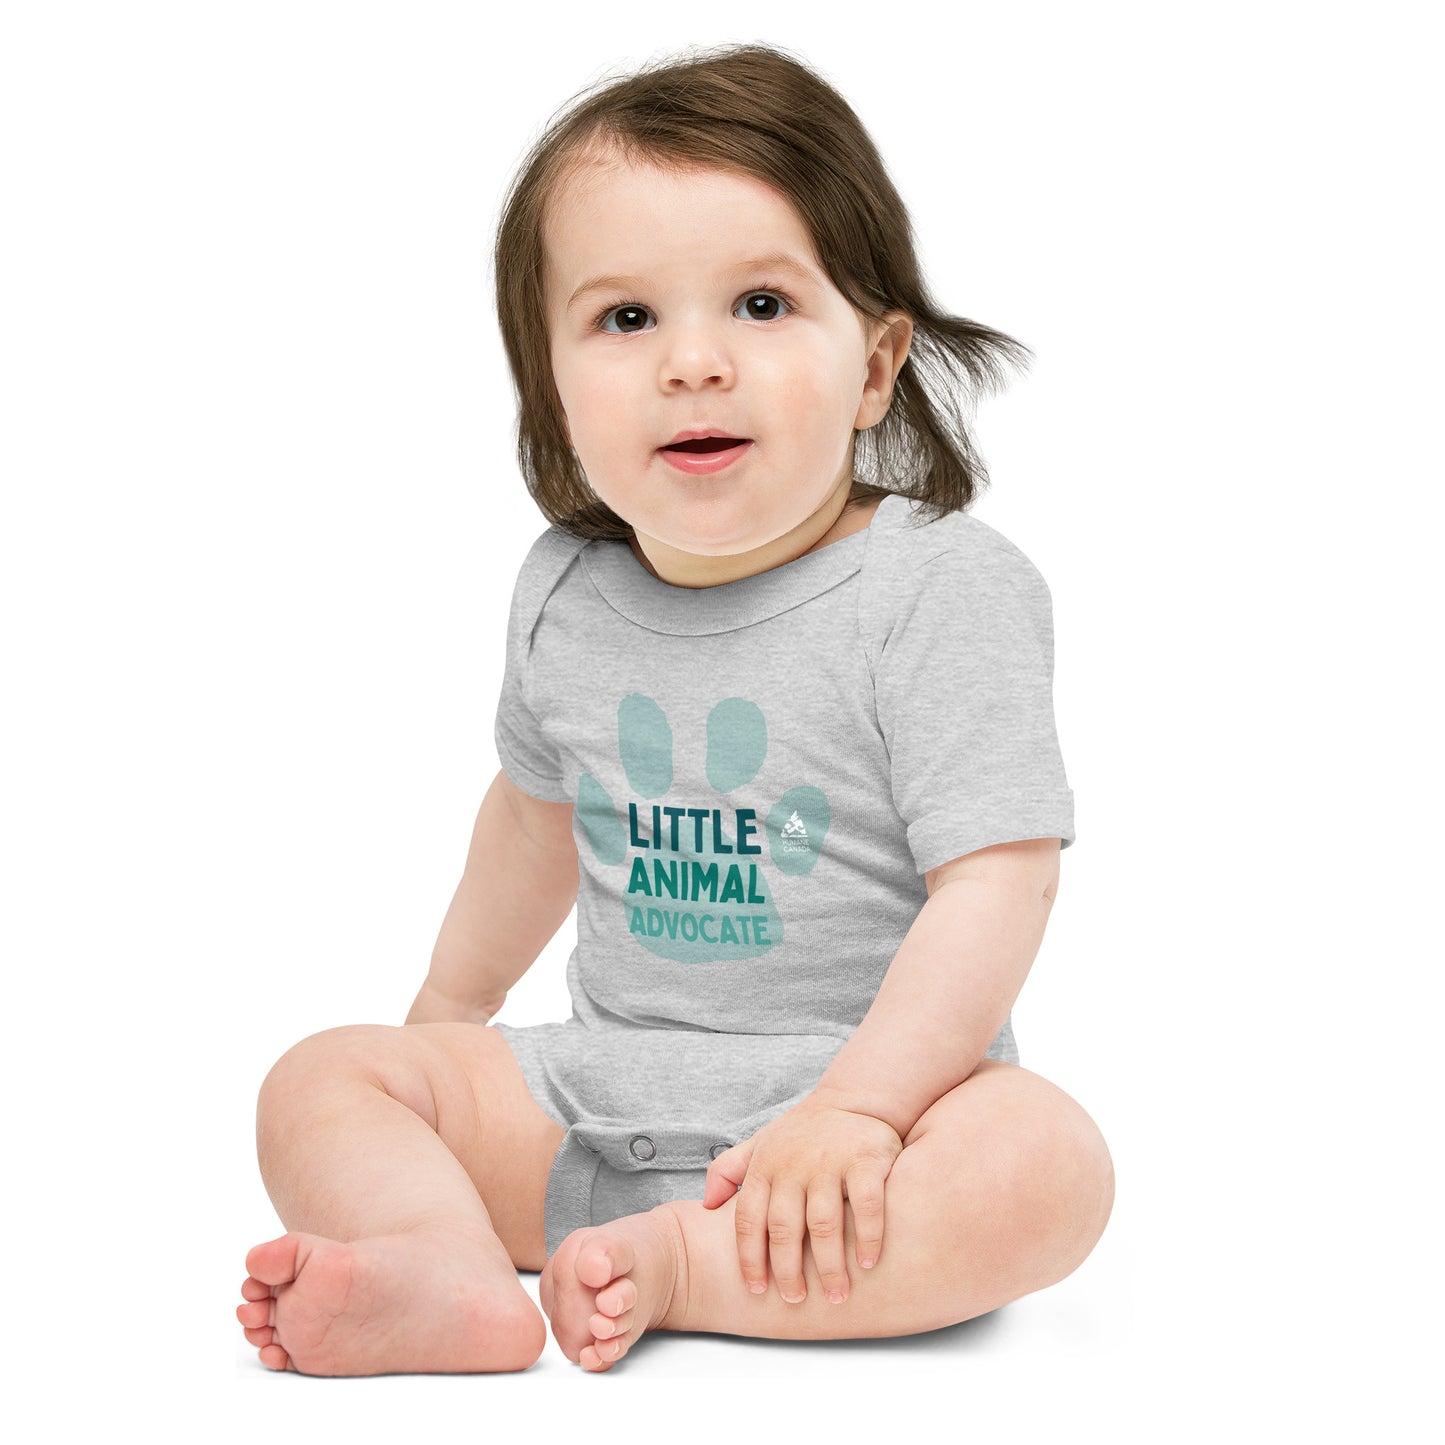 Little Animal Advocate - Baby short sleeve one piece